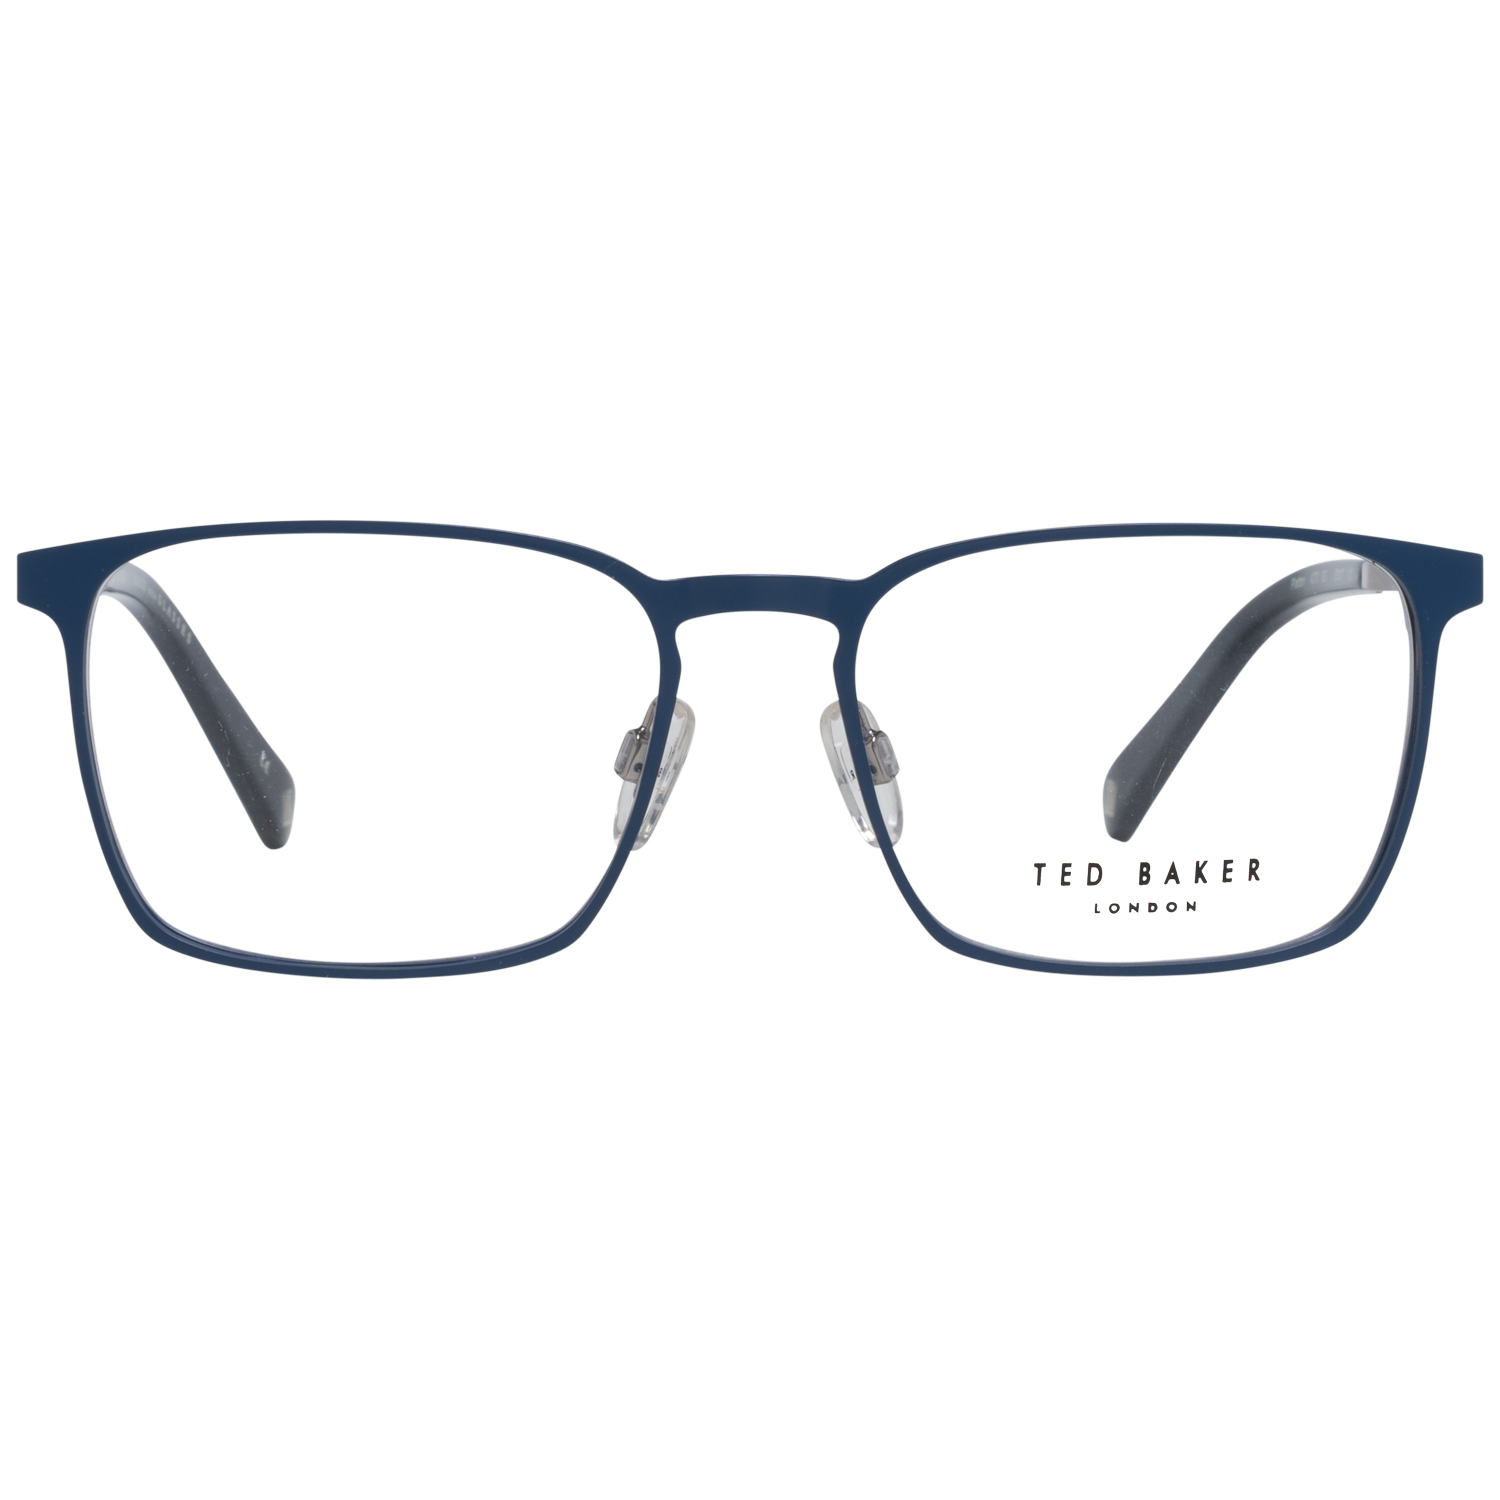 GenderMenMain colorBlueFrame colorBlueFrame materialMetalSize53-17-145Lenses width53mmLenses heigth40mmBridge length17mmFrame width135mmTemple length145mmShipment includesCase, Cleaning clothStyleFull-RimSpring hingeYes